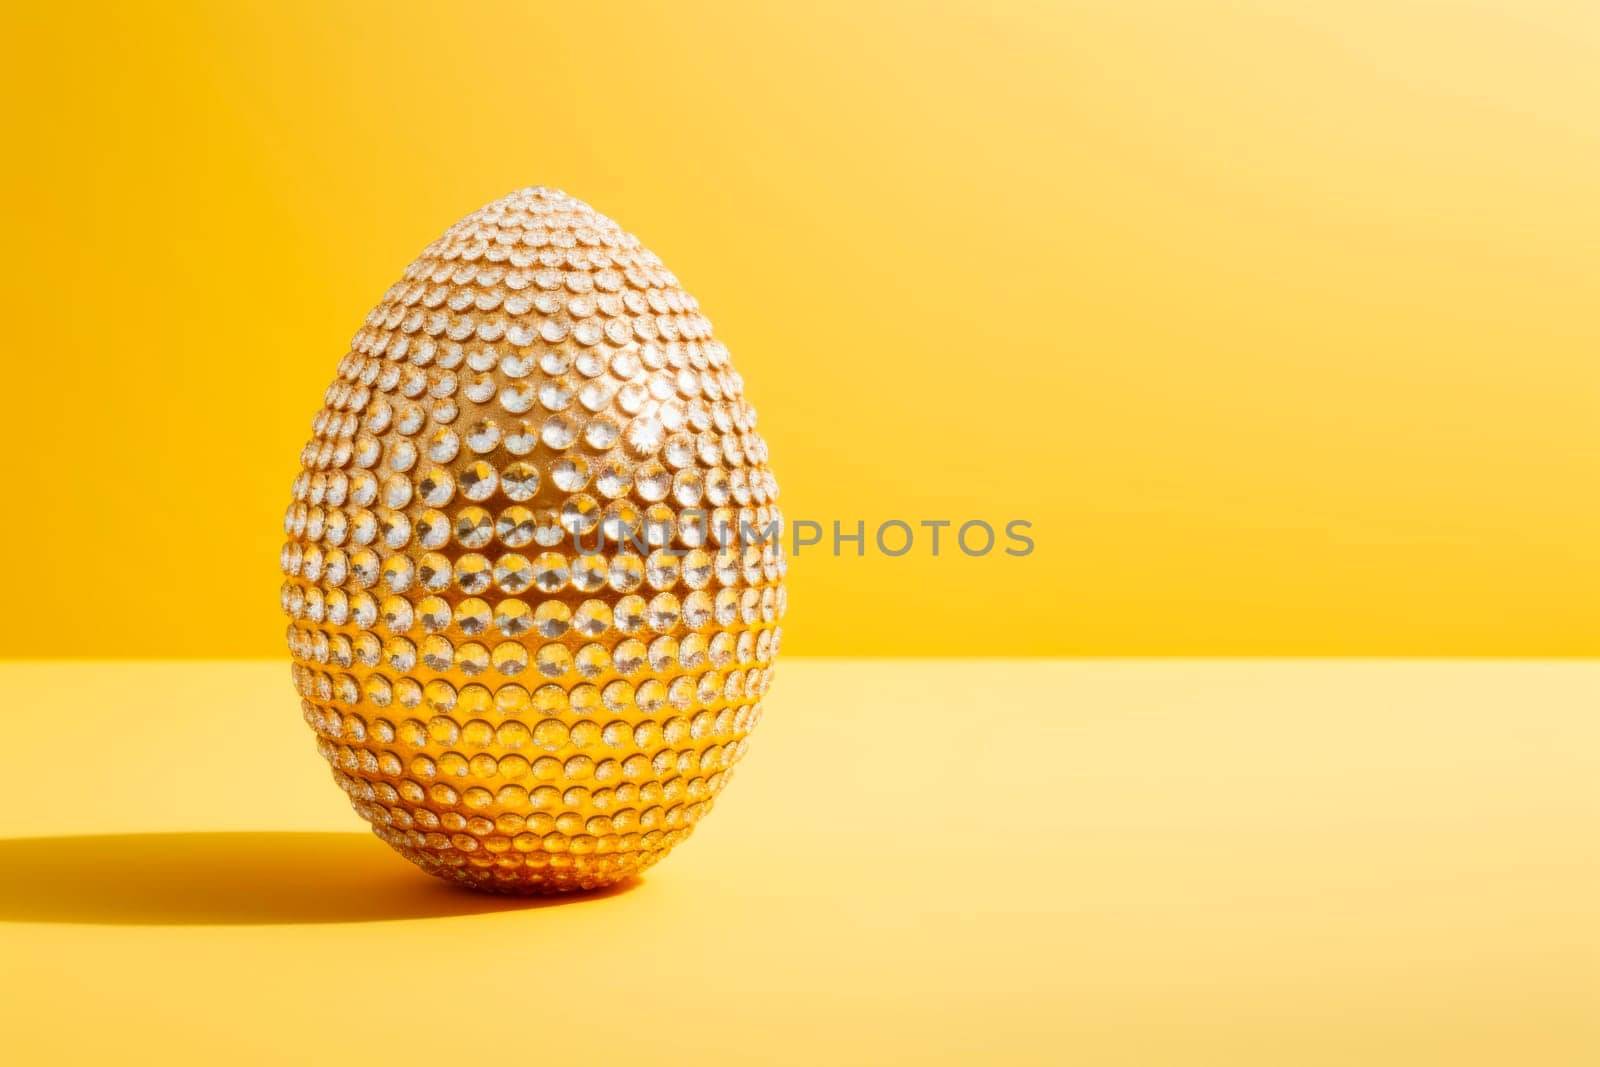 Glamorous shiny Easter egg in rhinestones and glitter. A yellow egg is an egg on a yellow background.